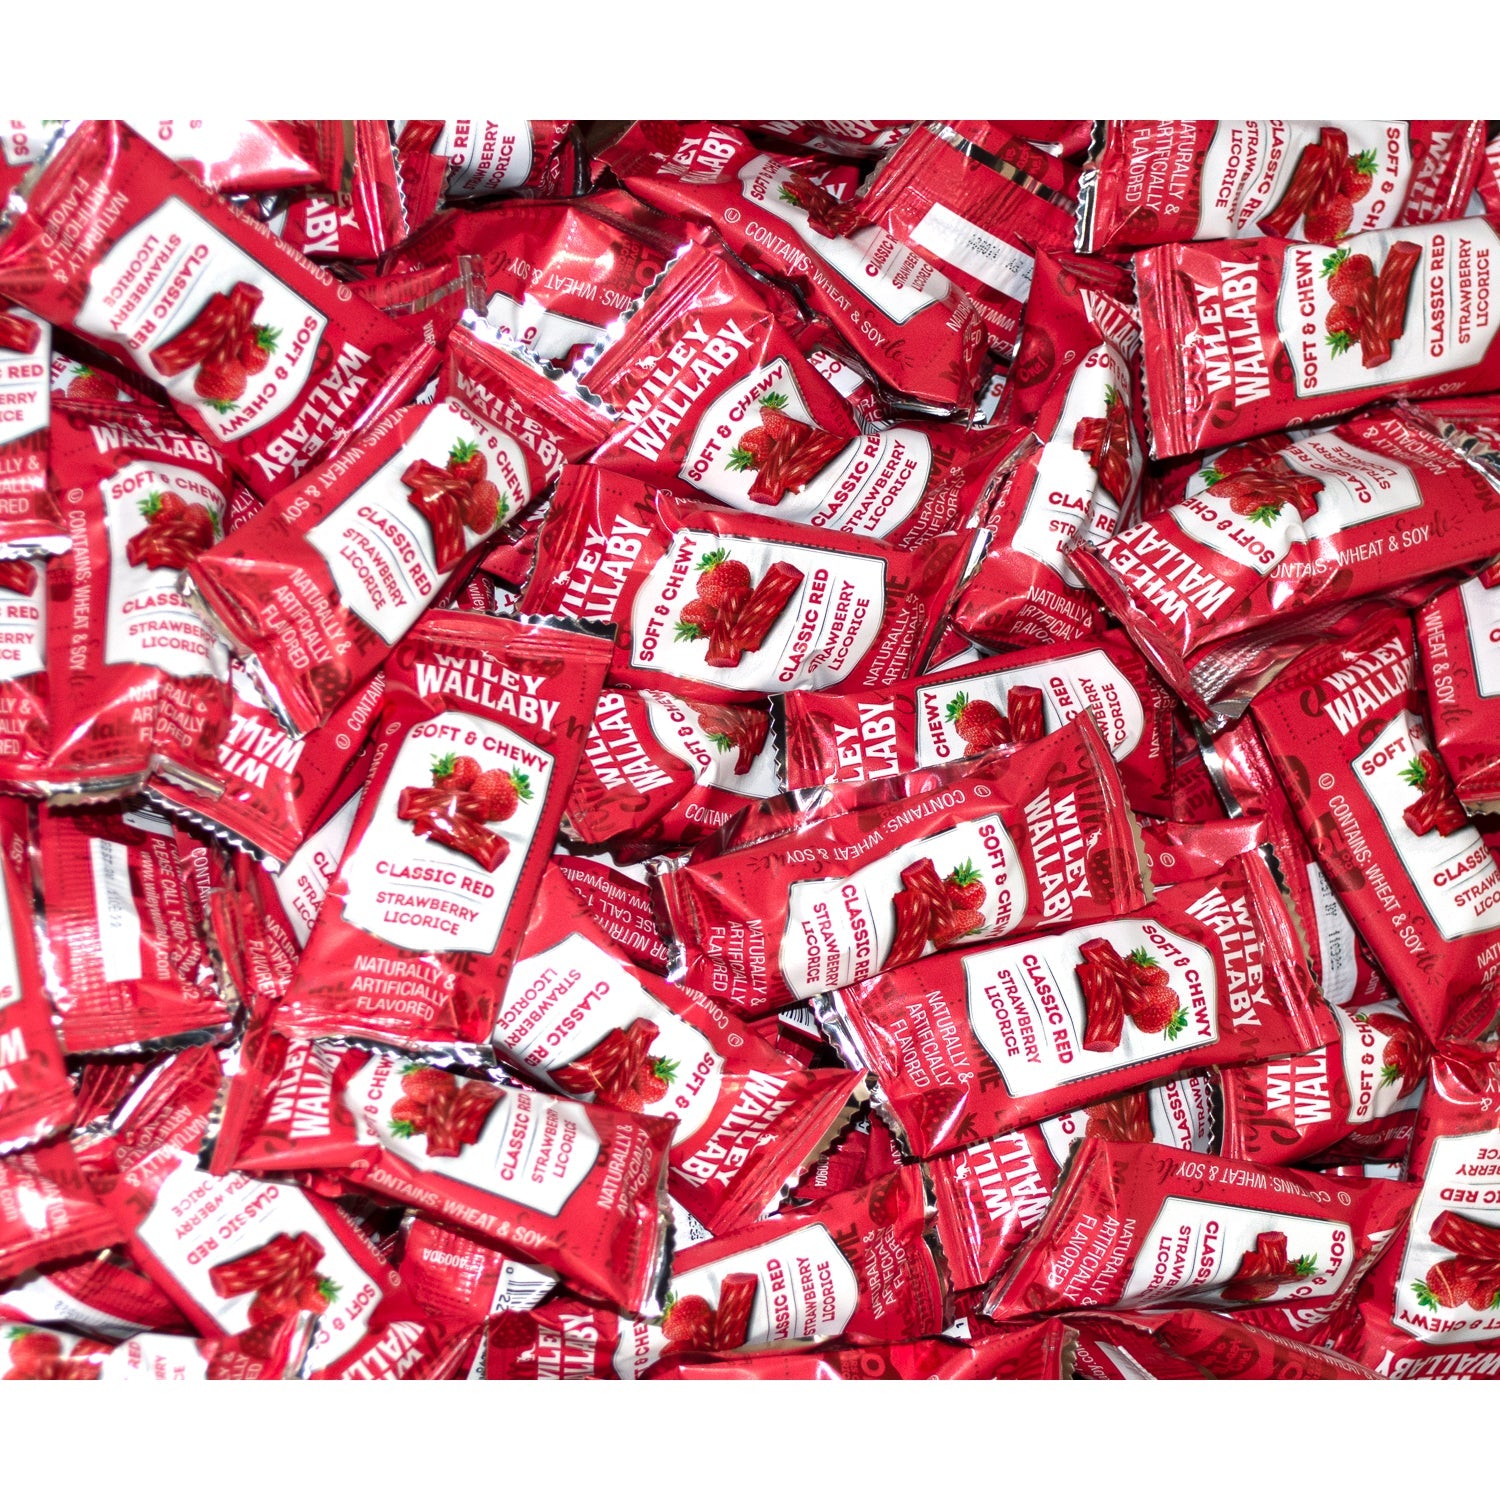 Wiley Wallaby Licorice Wiley Wallaby Original Red 0.28 Oz-250 Count Bite Size 